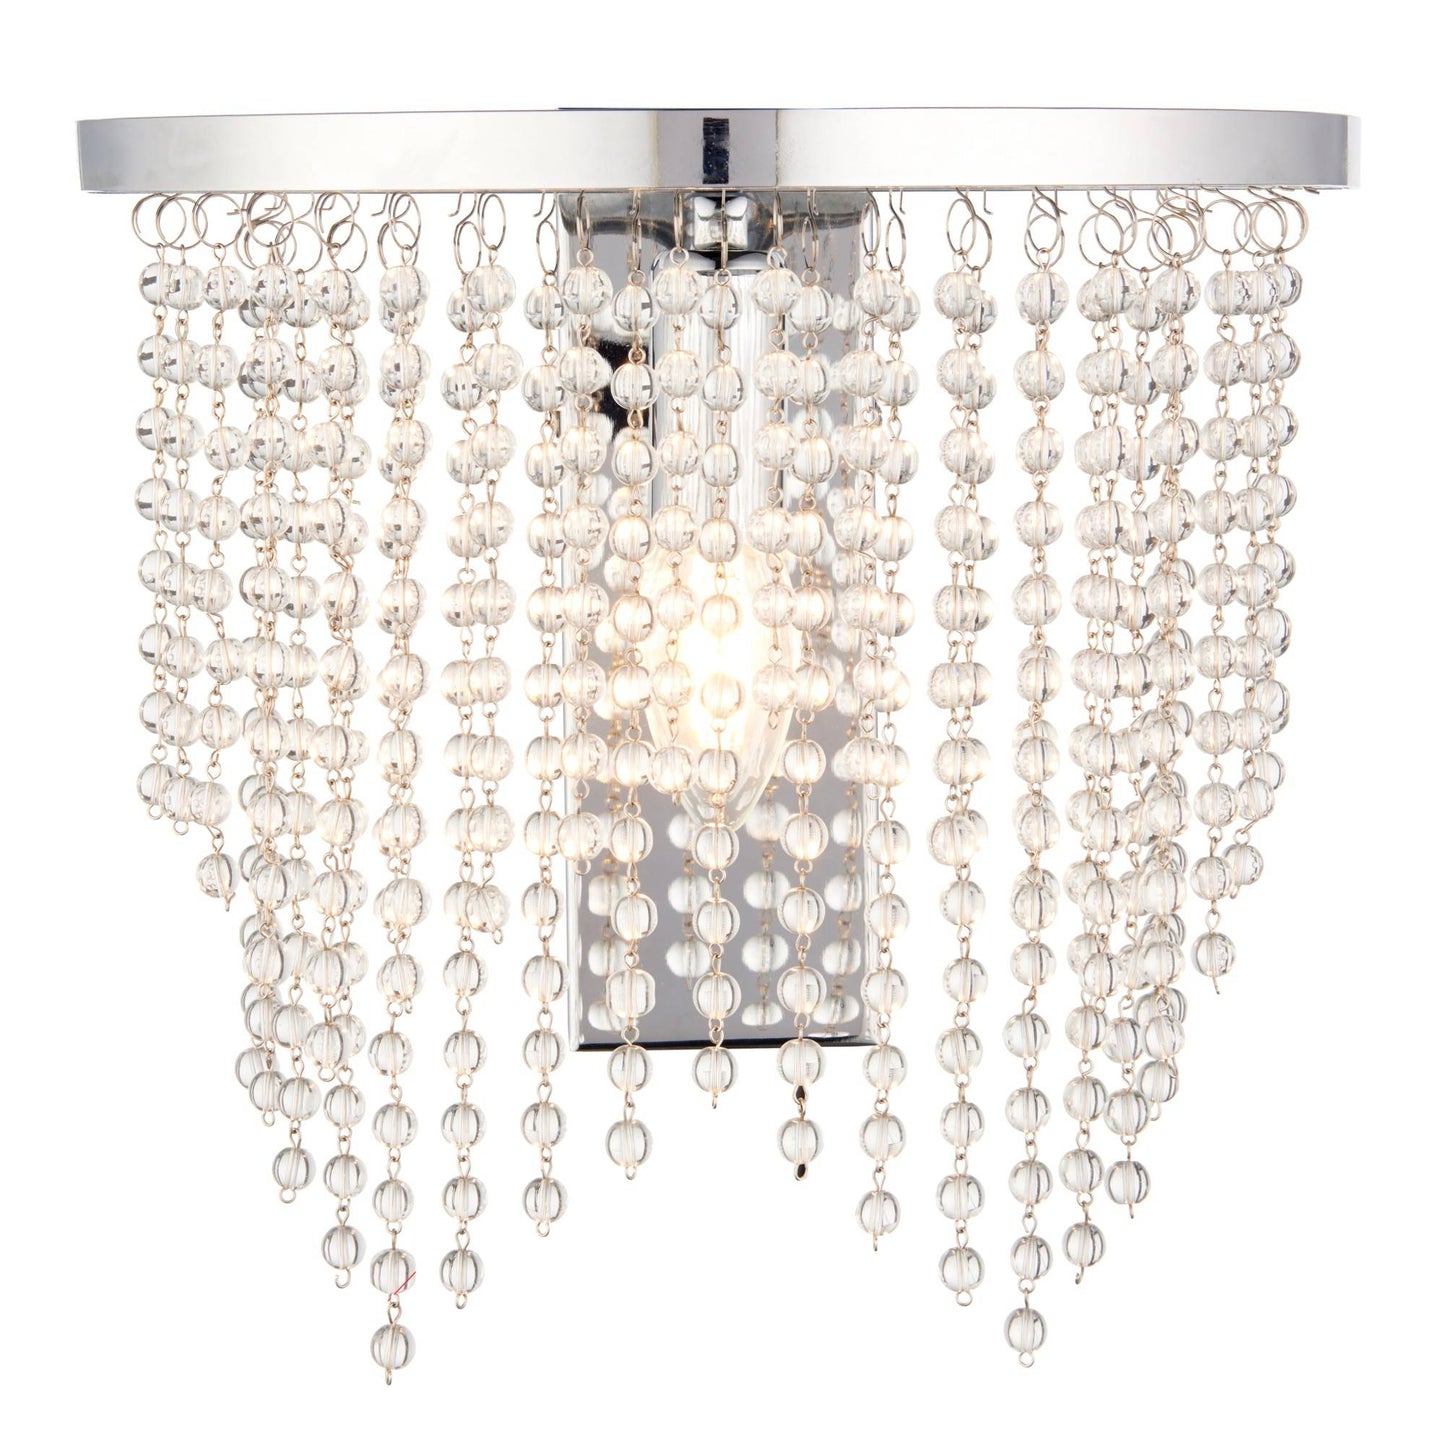 Rain 1 Light Polished Chrome Indoor Wall Light with Clear Glass Crystal Droplets